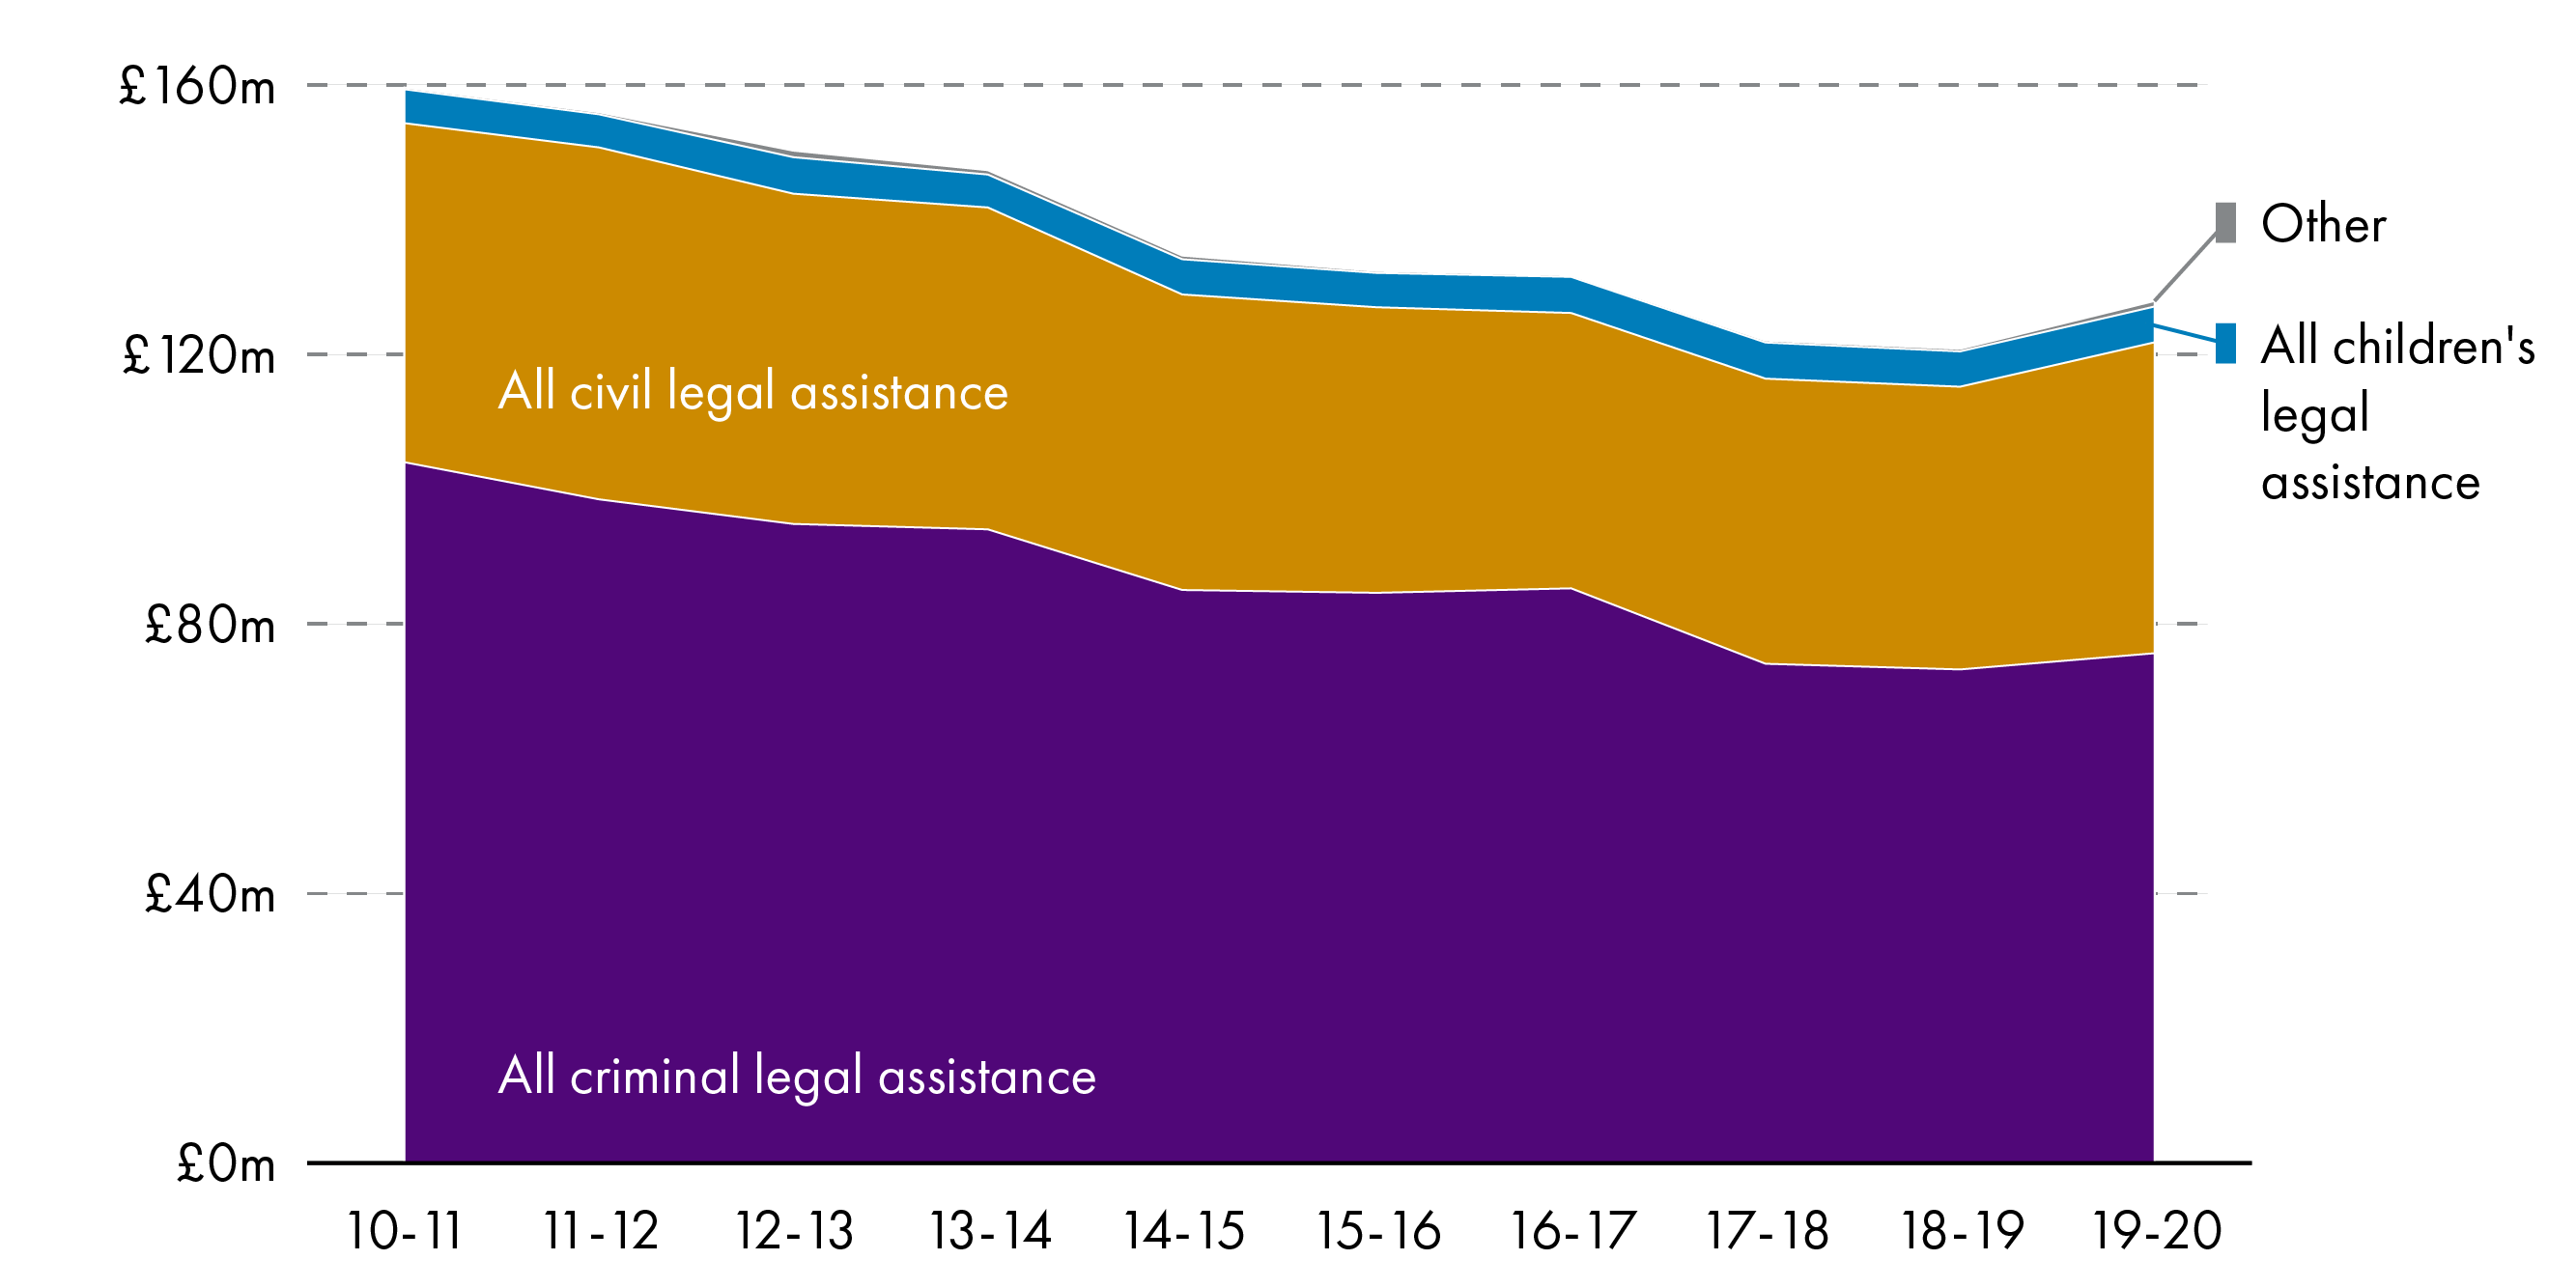 Graph showing reducing expenditure on legal aid between 2010-11 and 2019-20